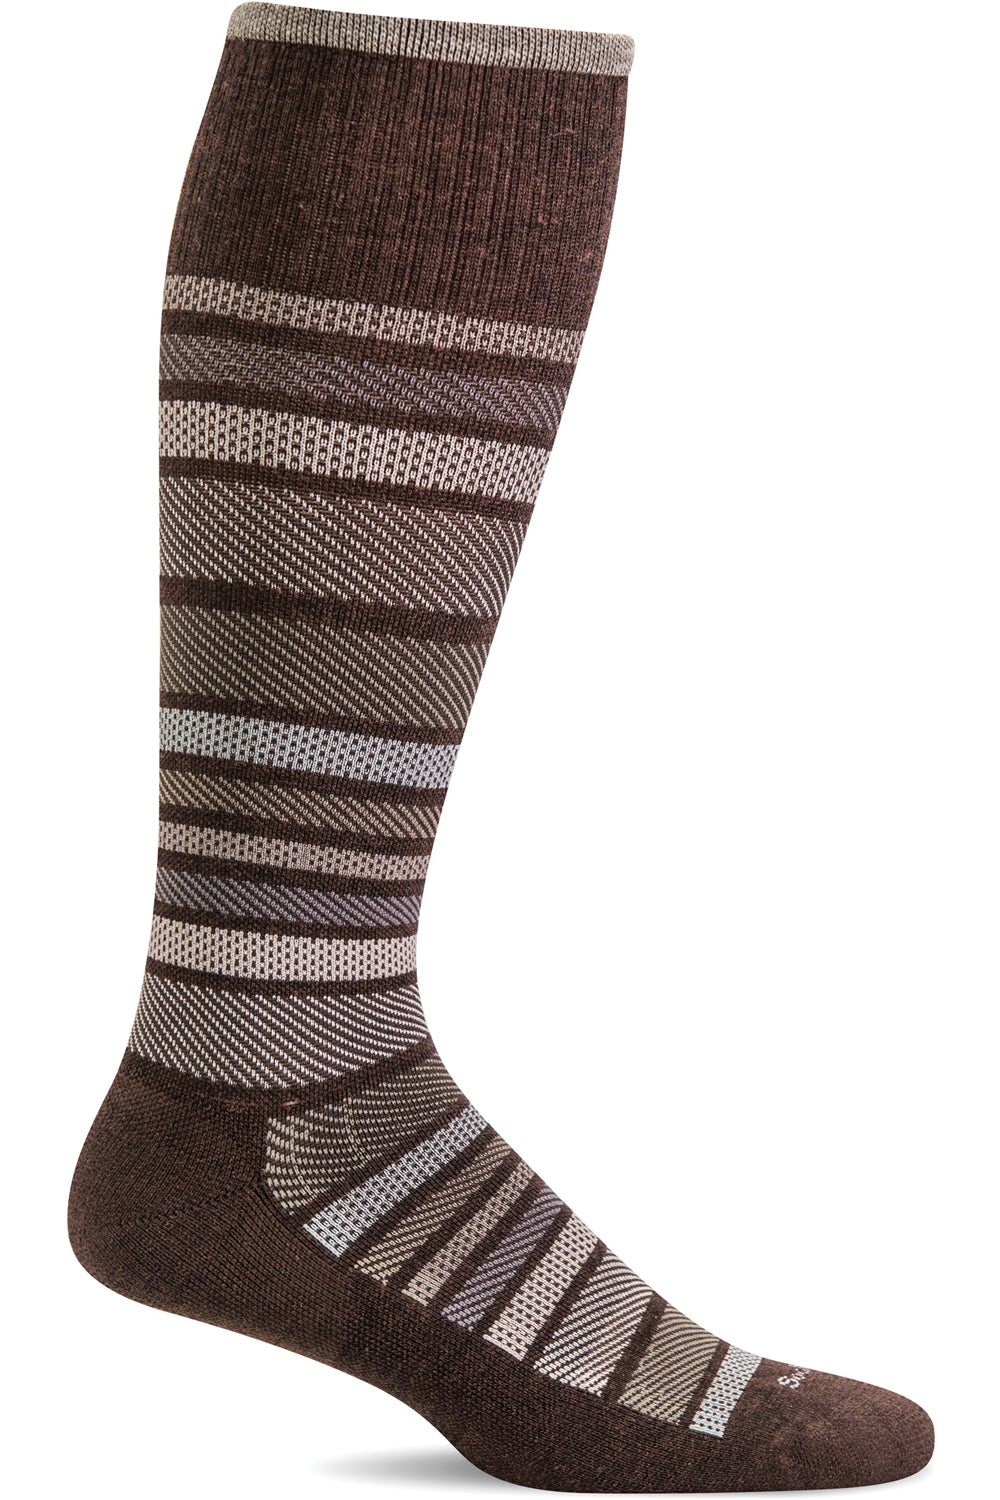 Sockwell Men's Twillful Compression Sock in Espresso color from the side